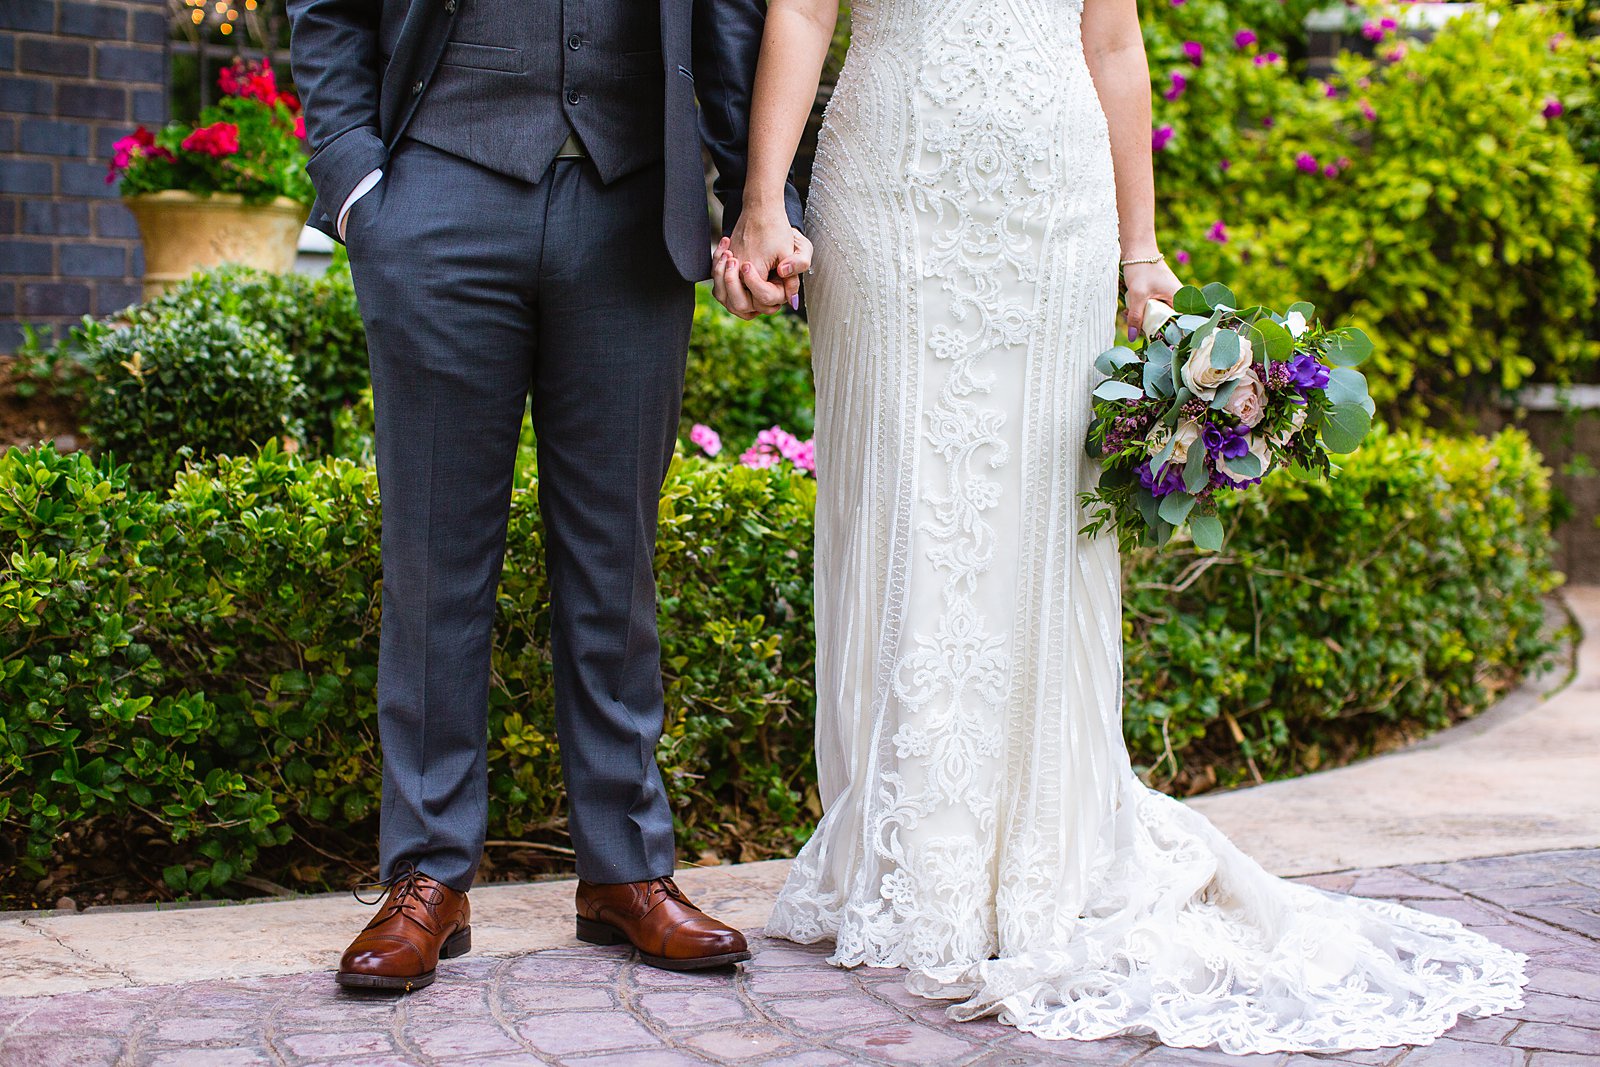 Bride and Groom wedding day outfit details by PMA Photography.